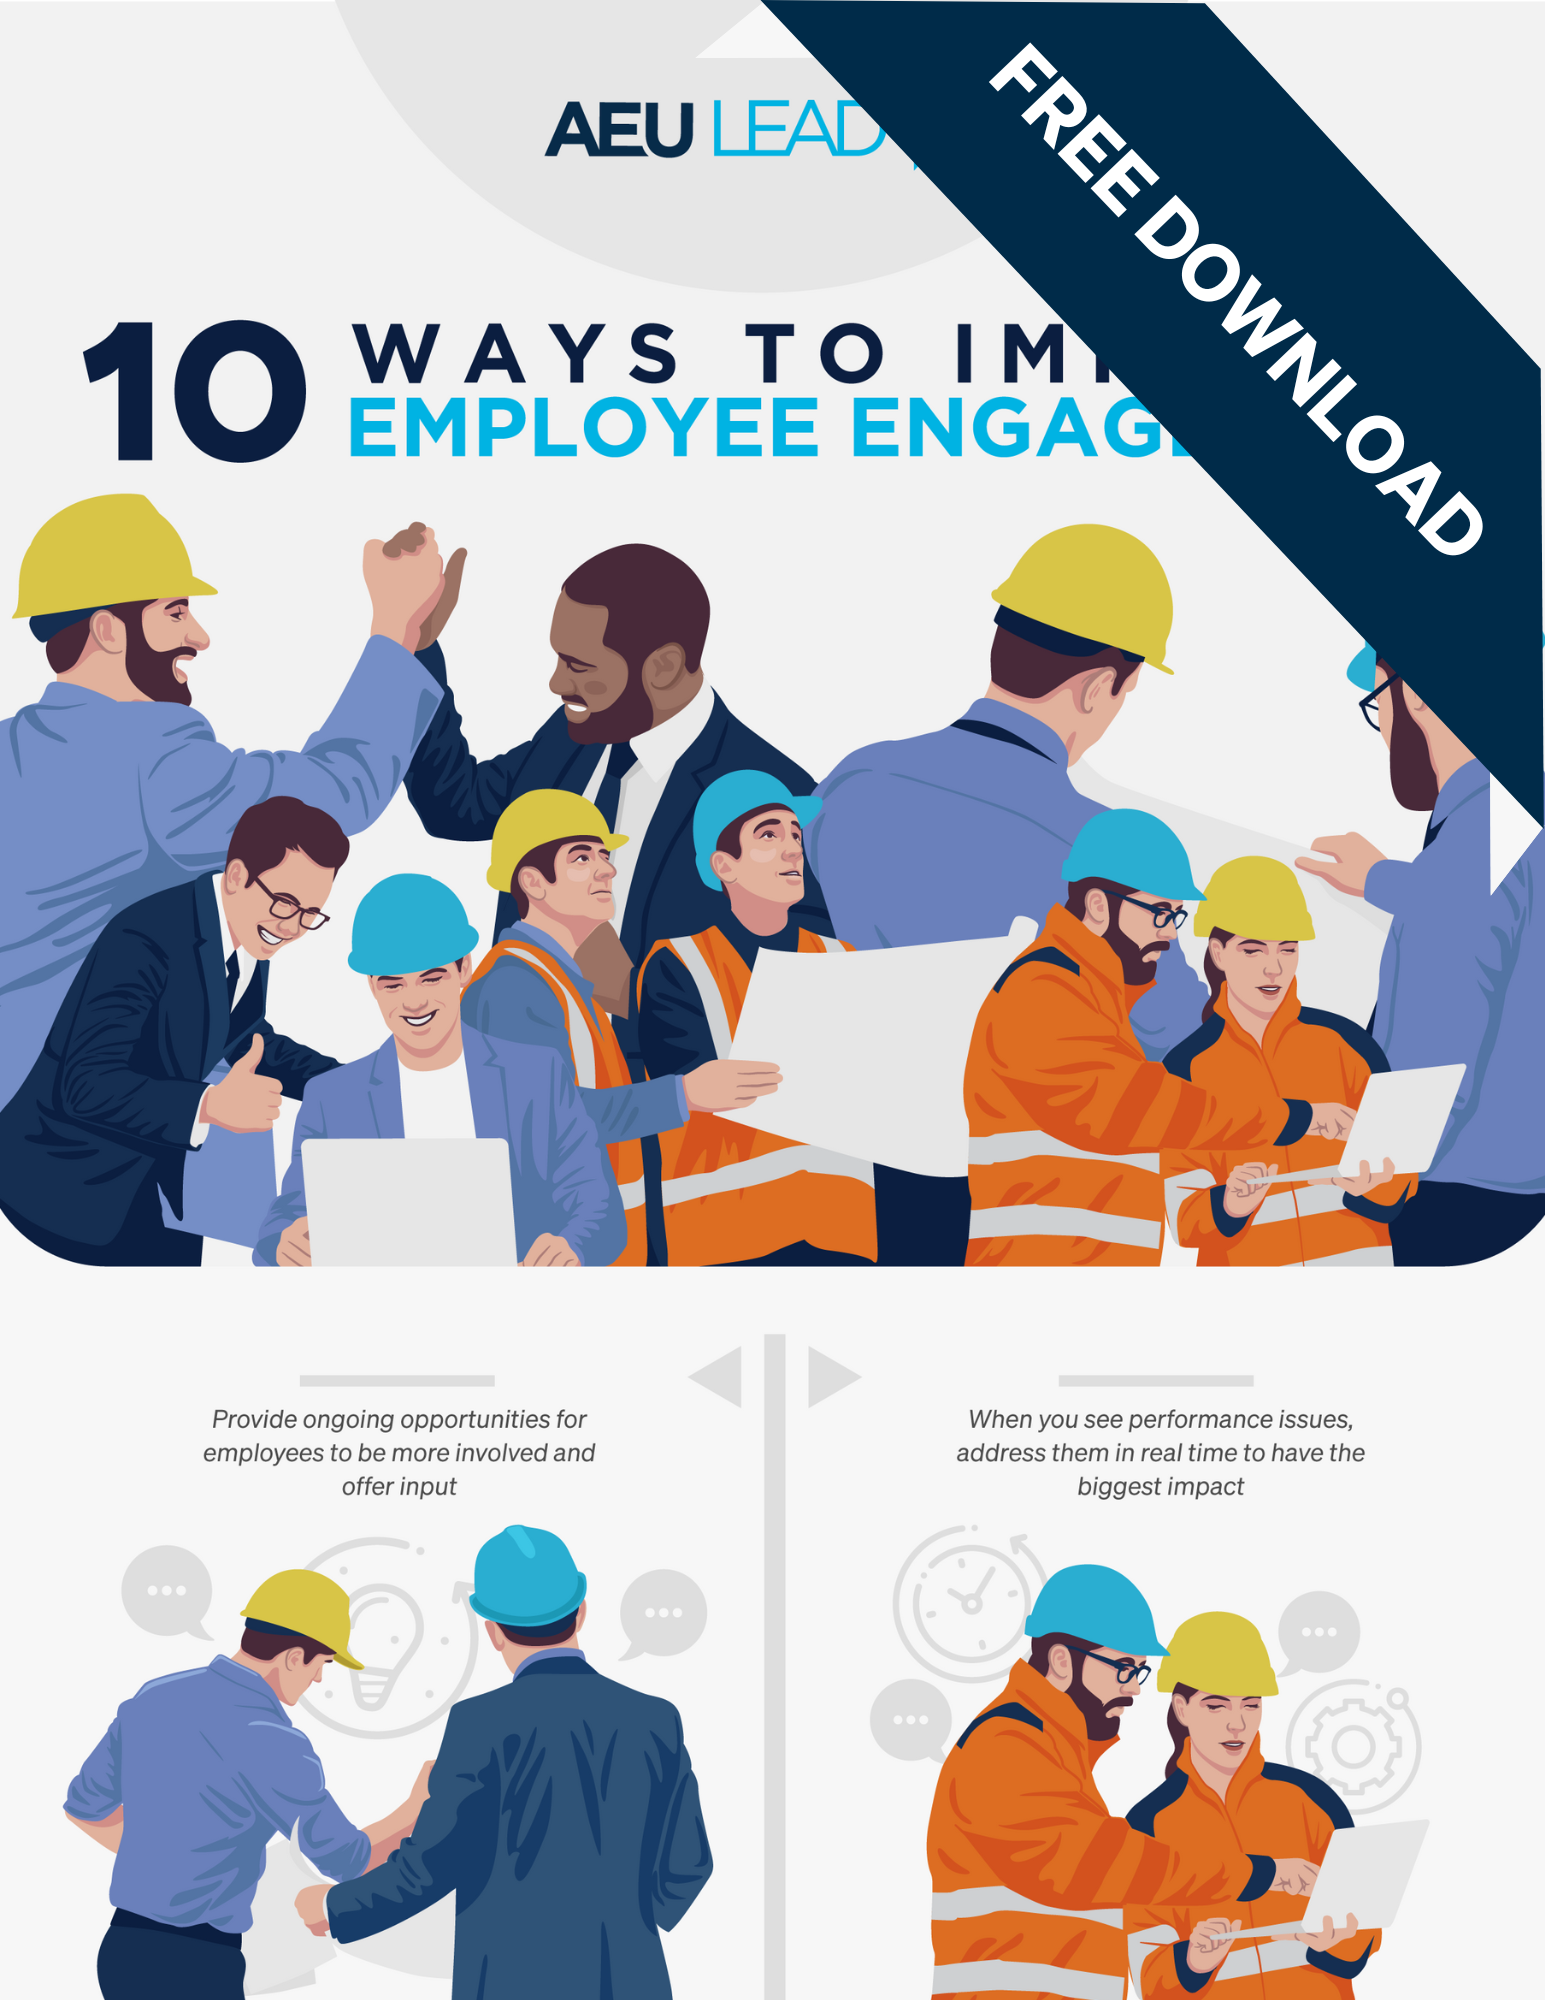 FREE DOWNLOAD - Infographic - AEU LEAD - 10 Ways to Improve Employee Engagement 2023